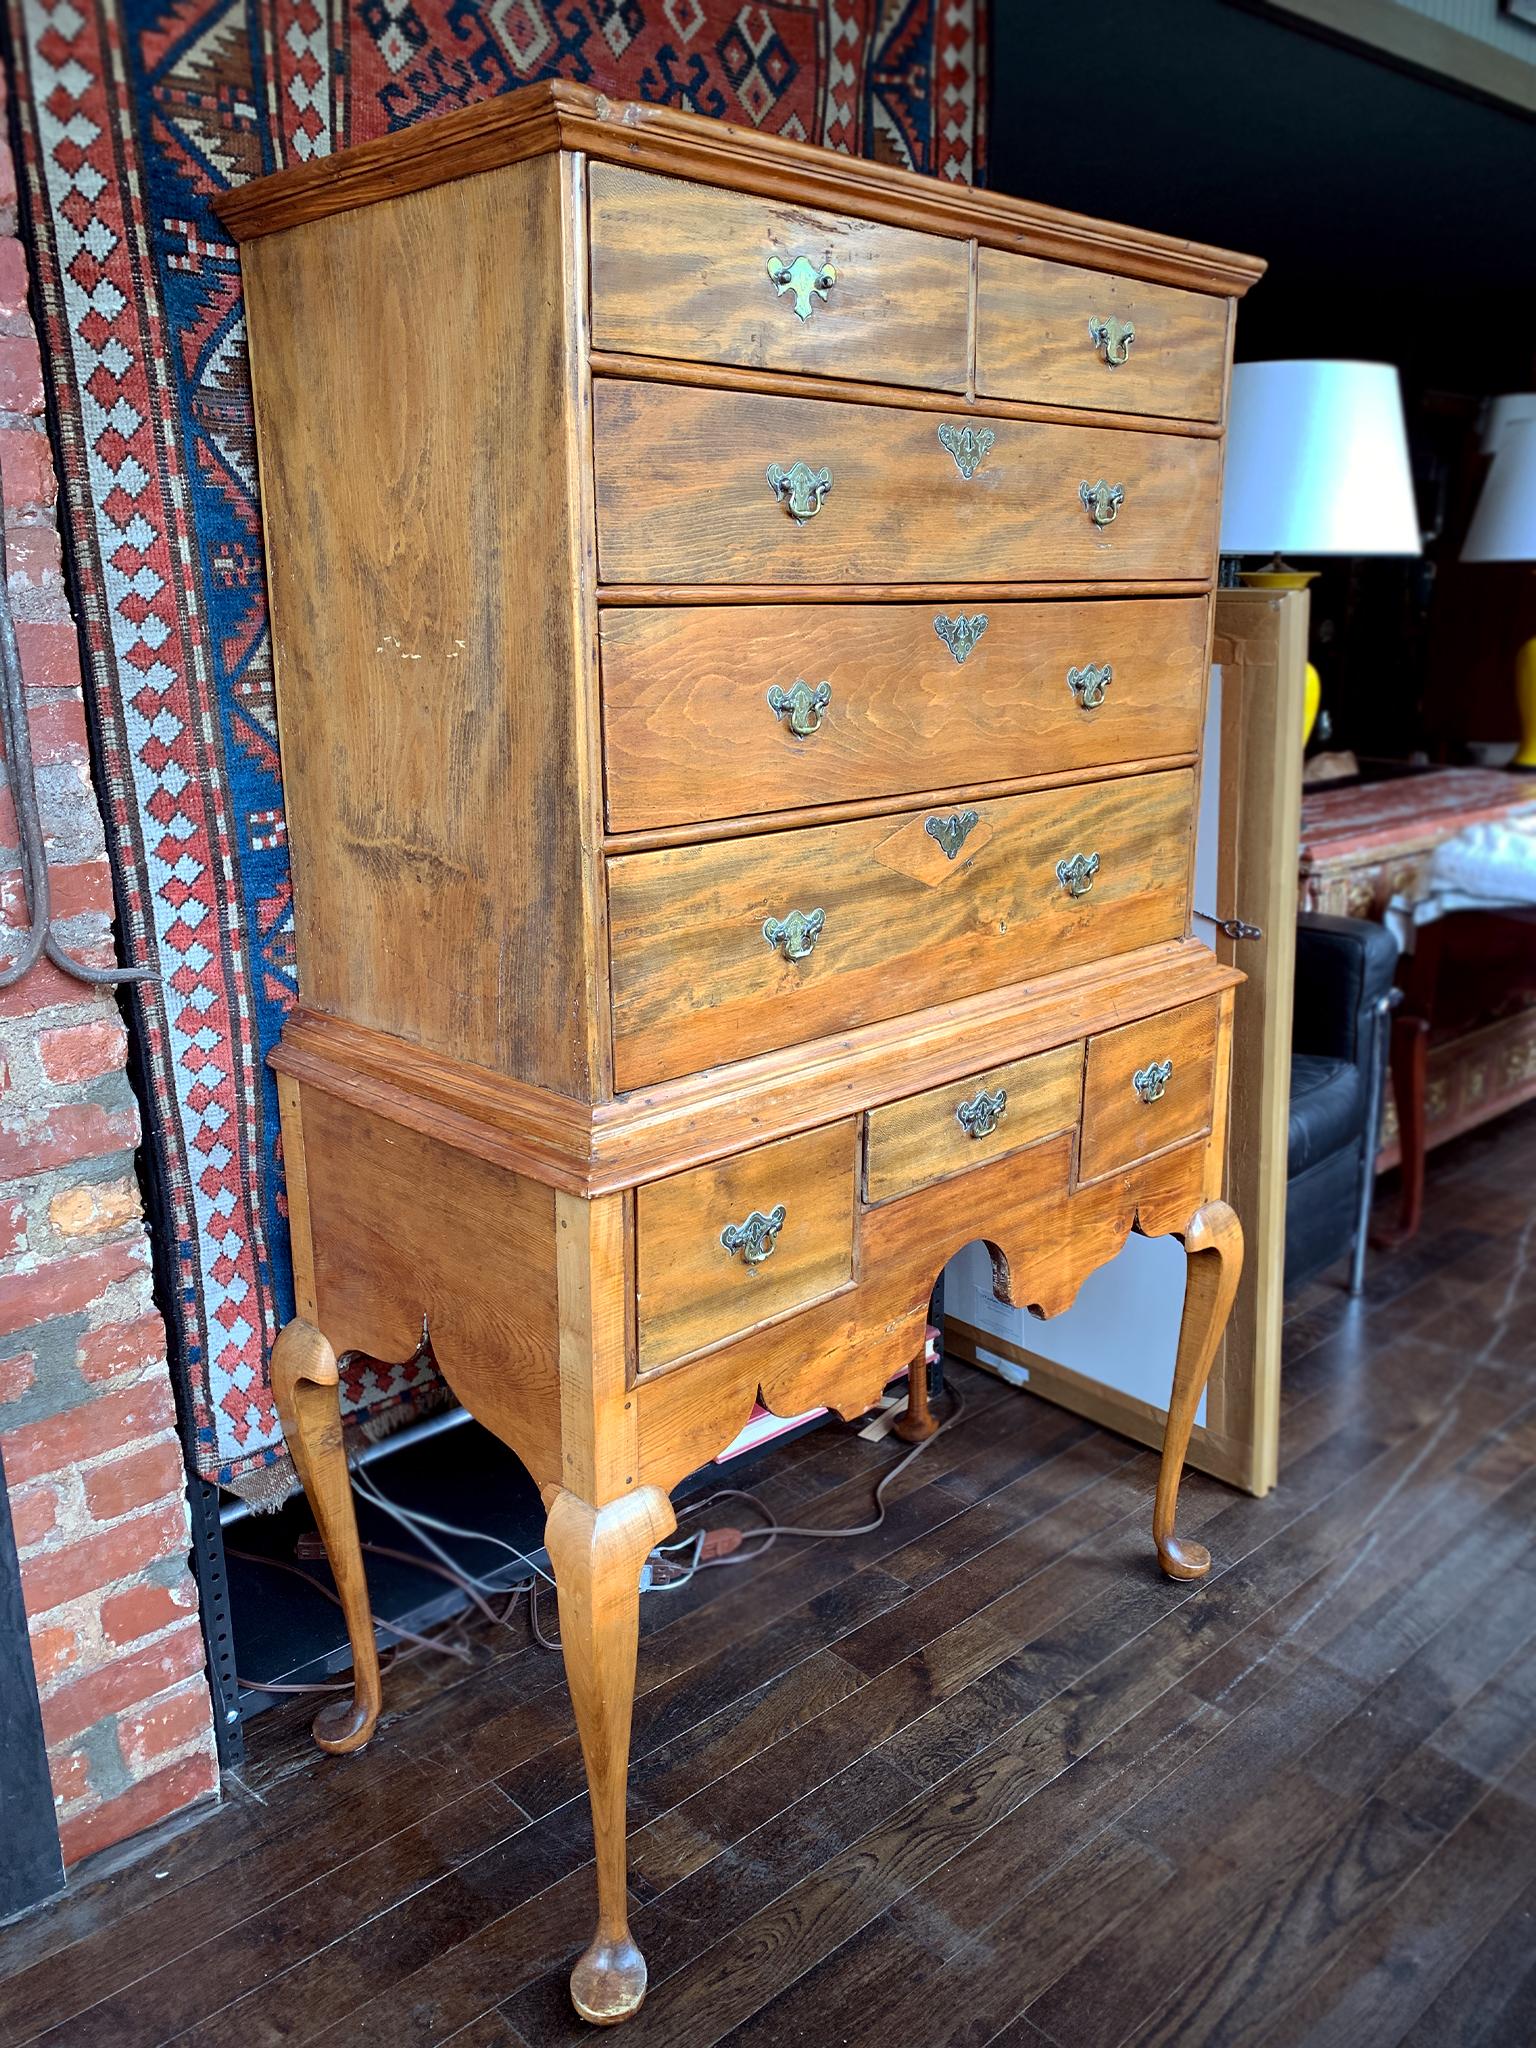 A classic Queen Anne highboy hand-crafted in America in 1750. It's comprised of pine and maple wood with a rich reddish brown finish. The woodwork is exquisite. Two cases make up the structure. The top segment is a flattop with 2 small drawers and 3